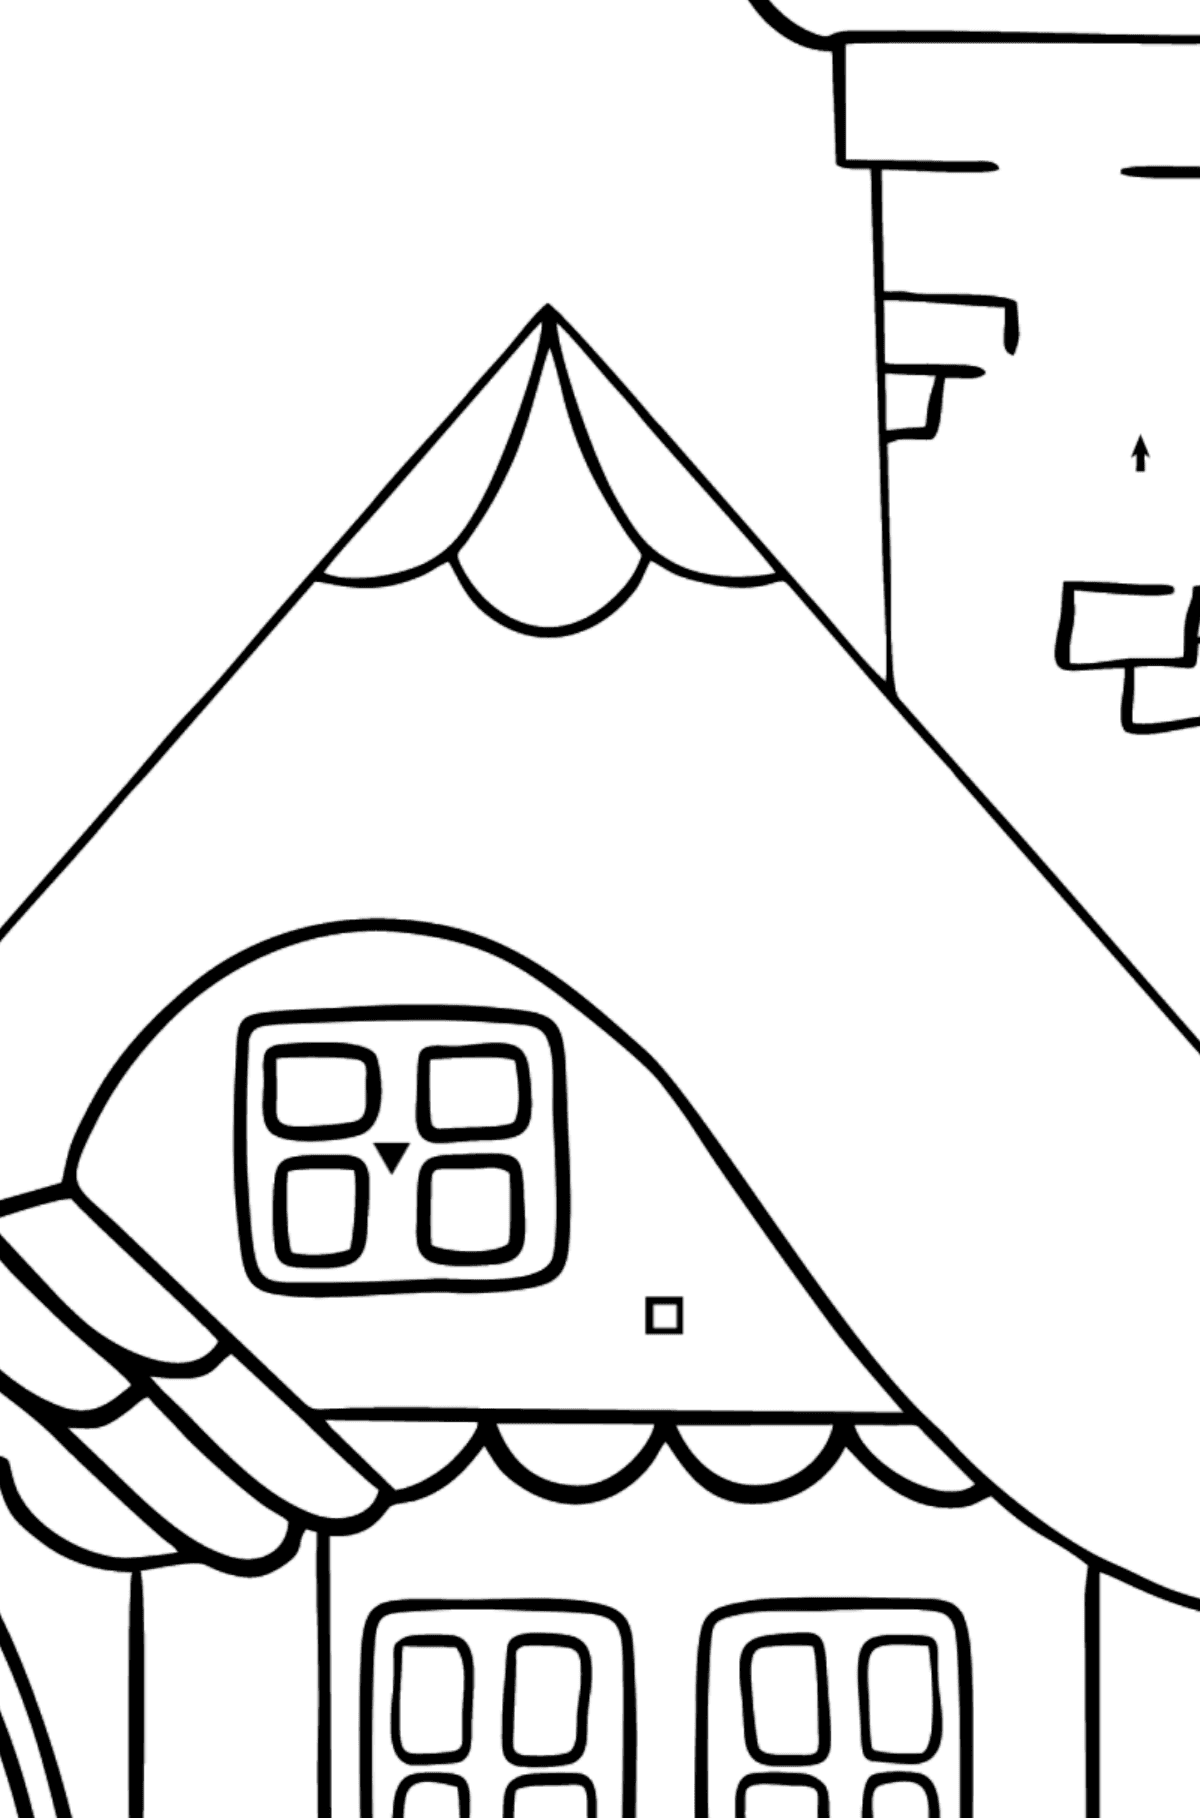 Simple Coloring Page - A Wonderful House - Coloring by Symbols for Kids